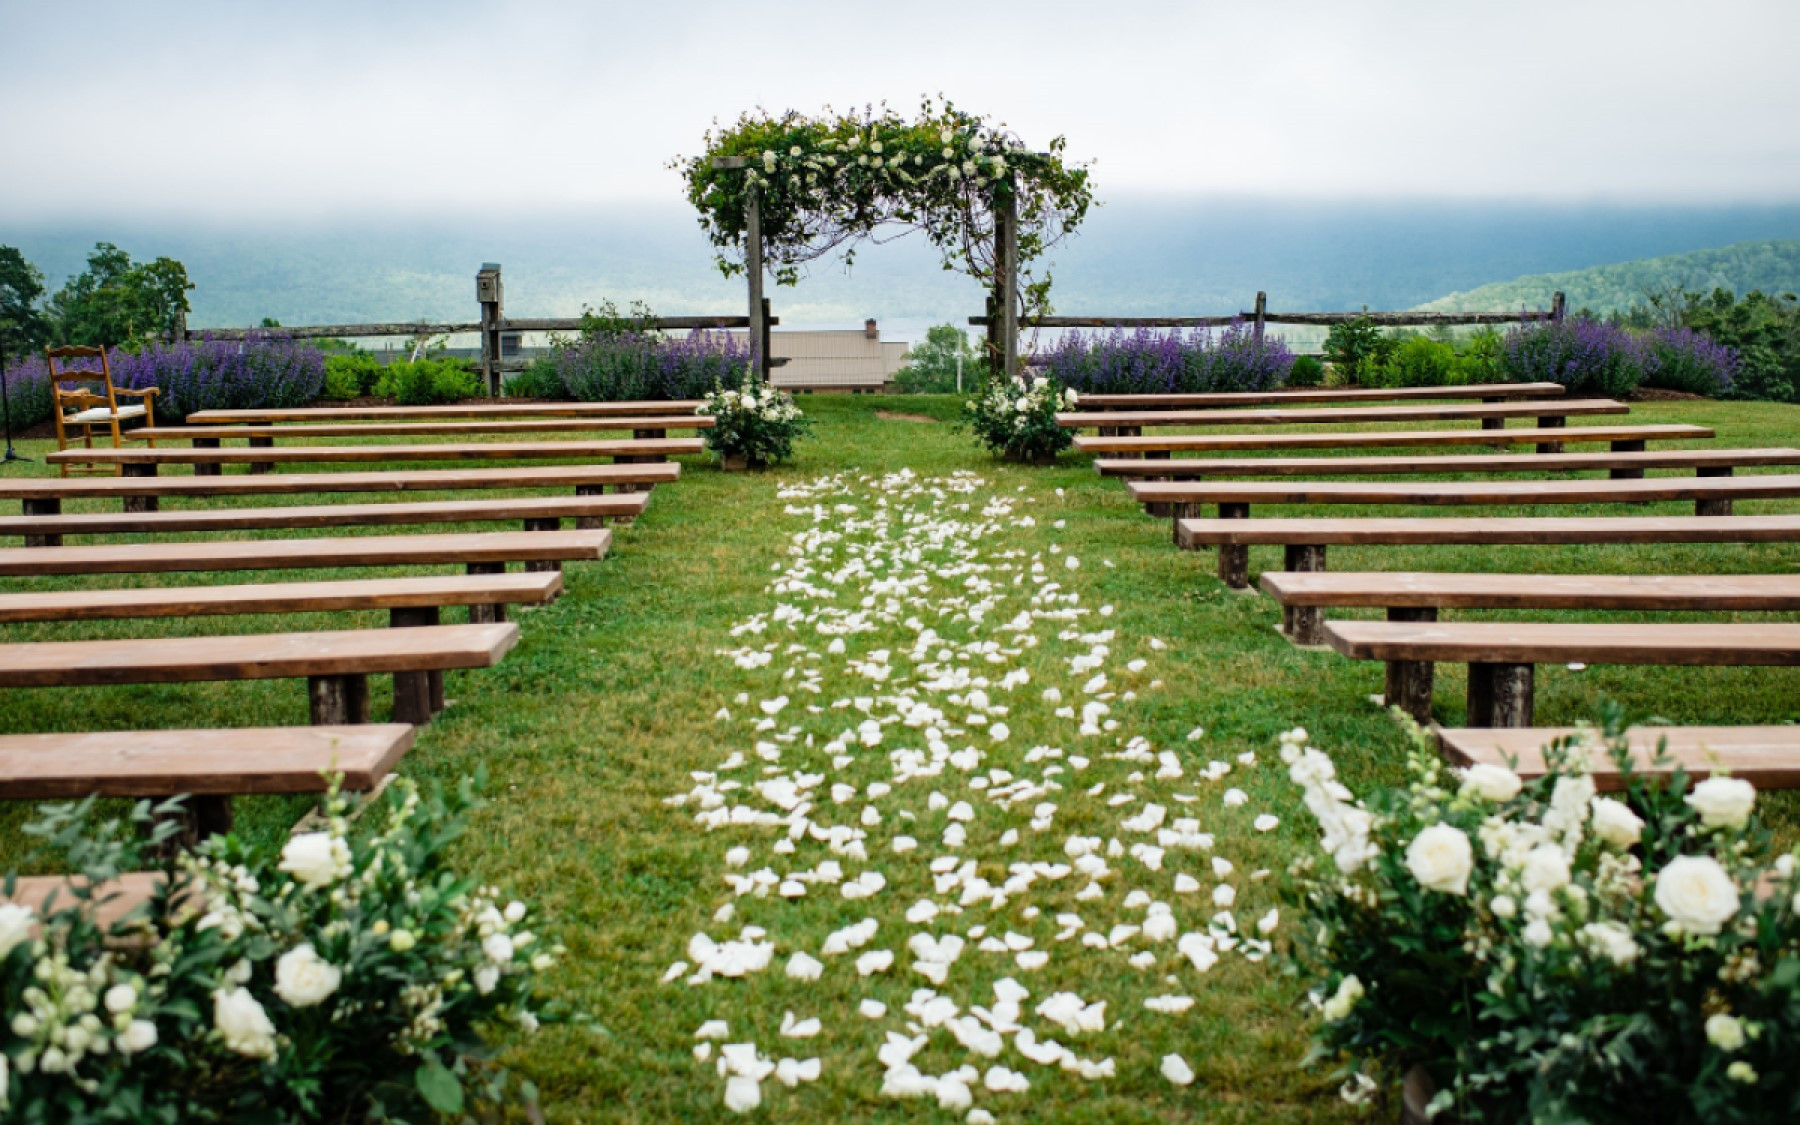 wedding knoll with decor and petals in aisle on foggy day.